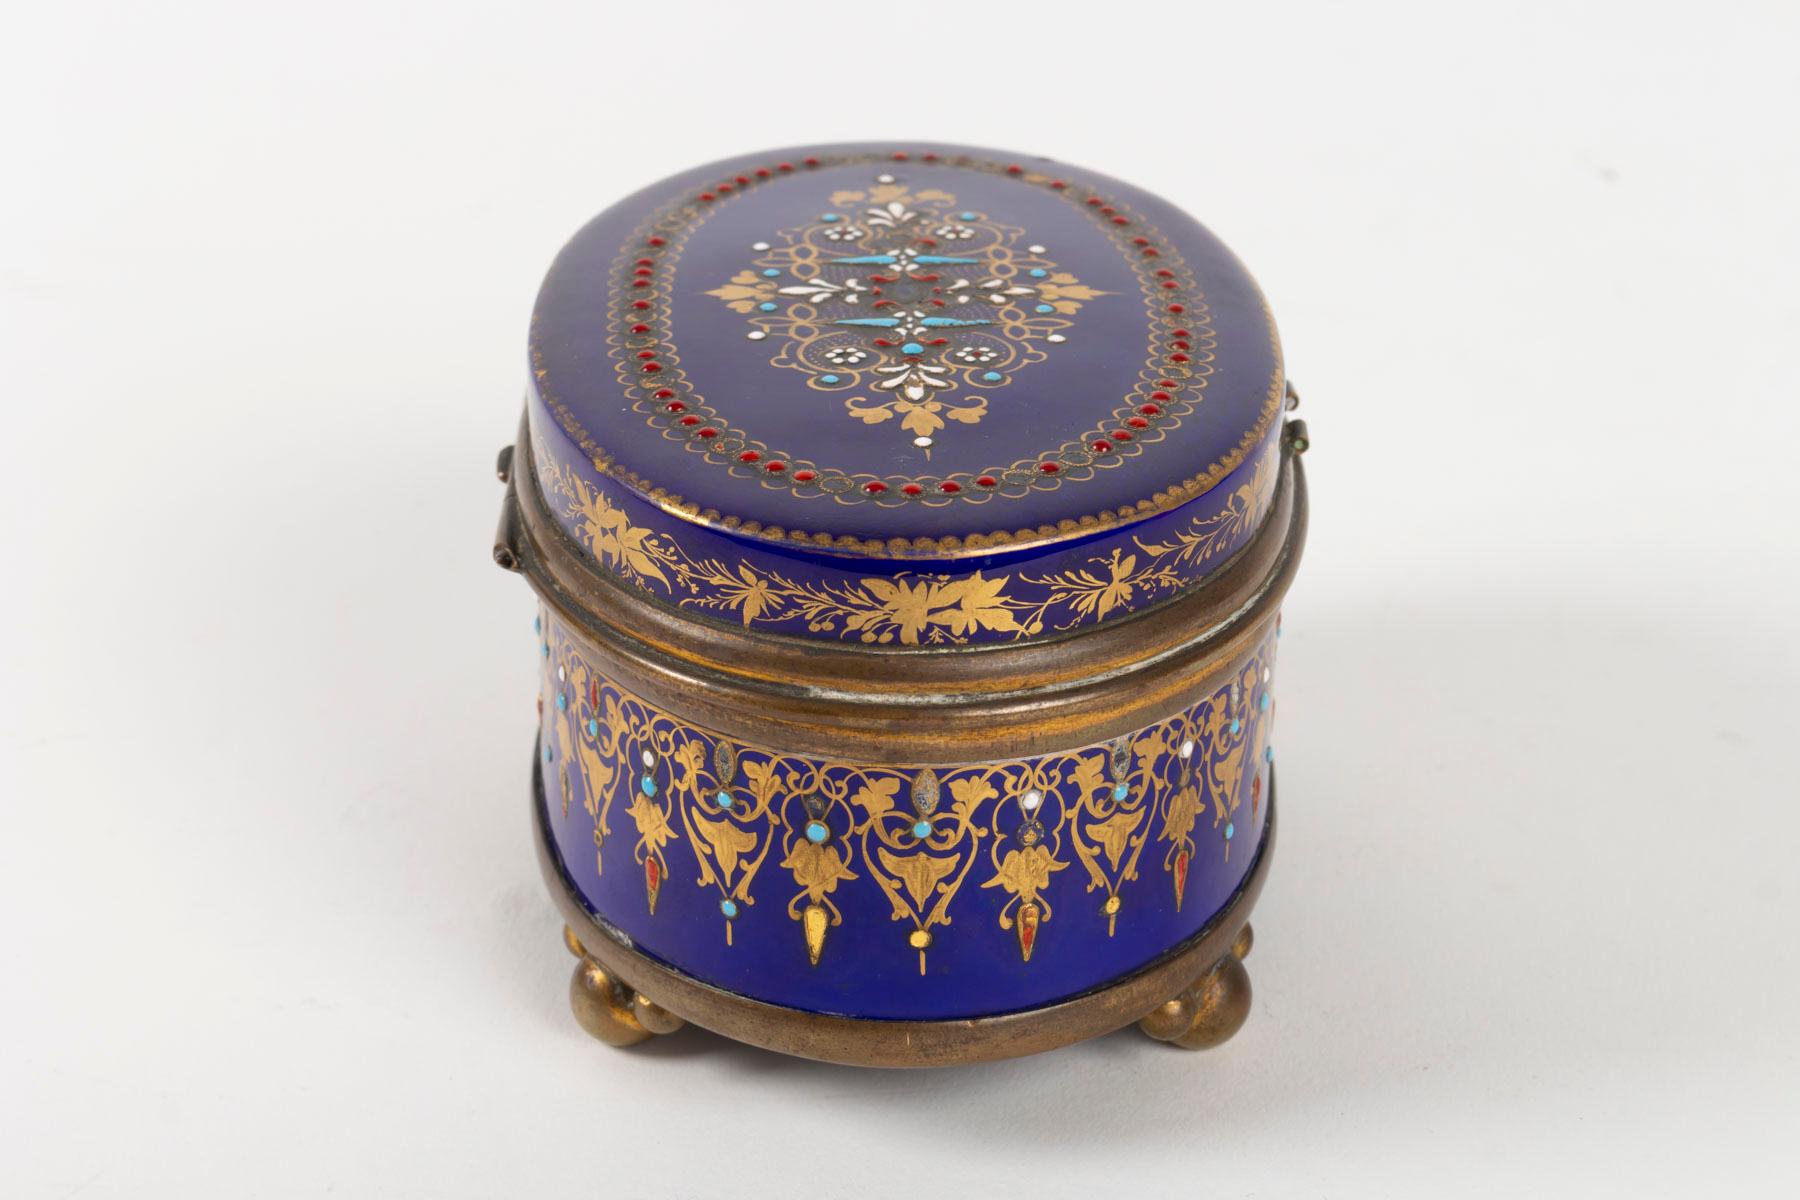 Box, box 19th century, Napoleon III period, porcelain and brass mounting, oval, dark sèvres blue, enameled, red velvet interior, period label underside
Measures: H 7cm, W 13cm, P 8cm.